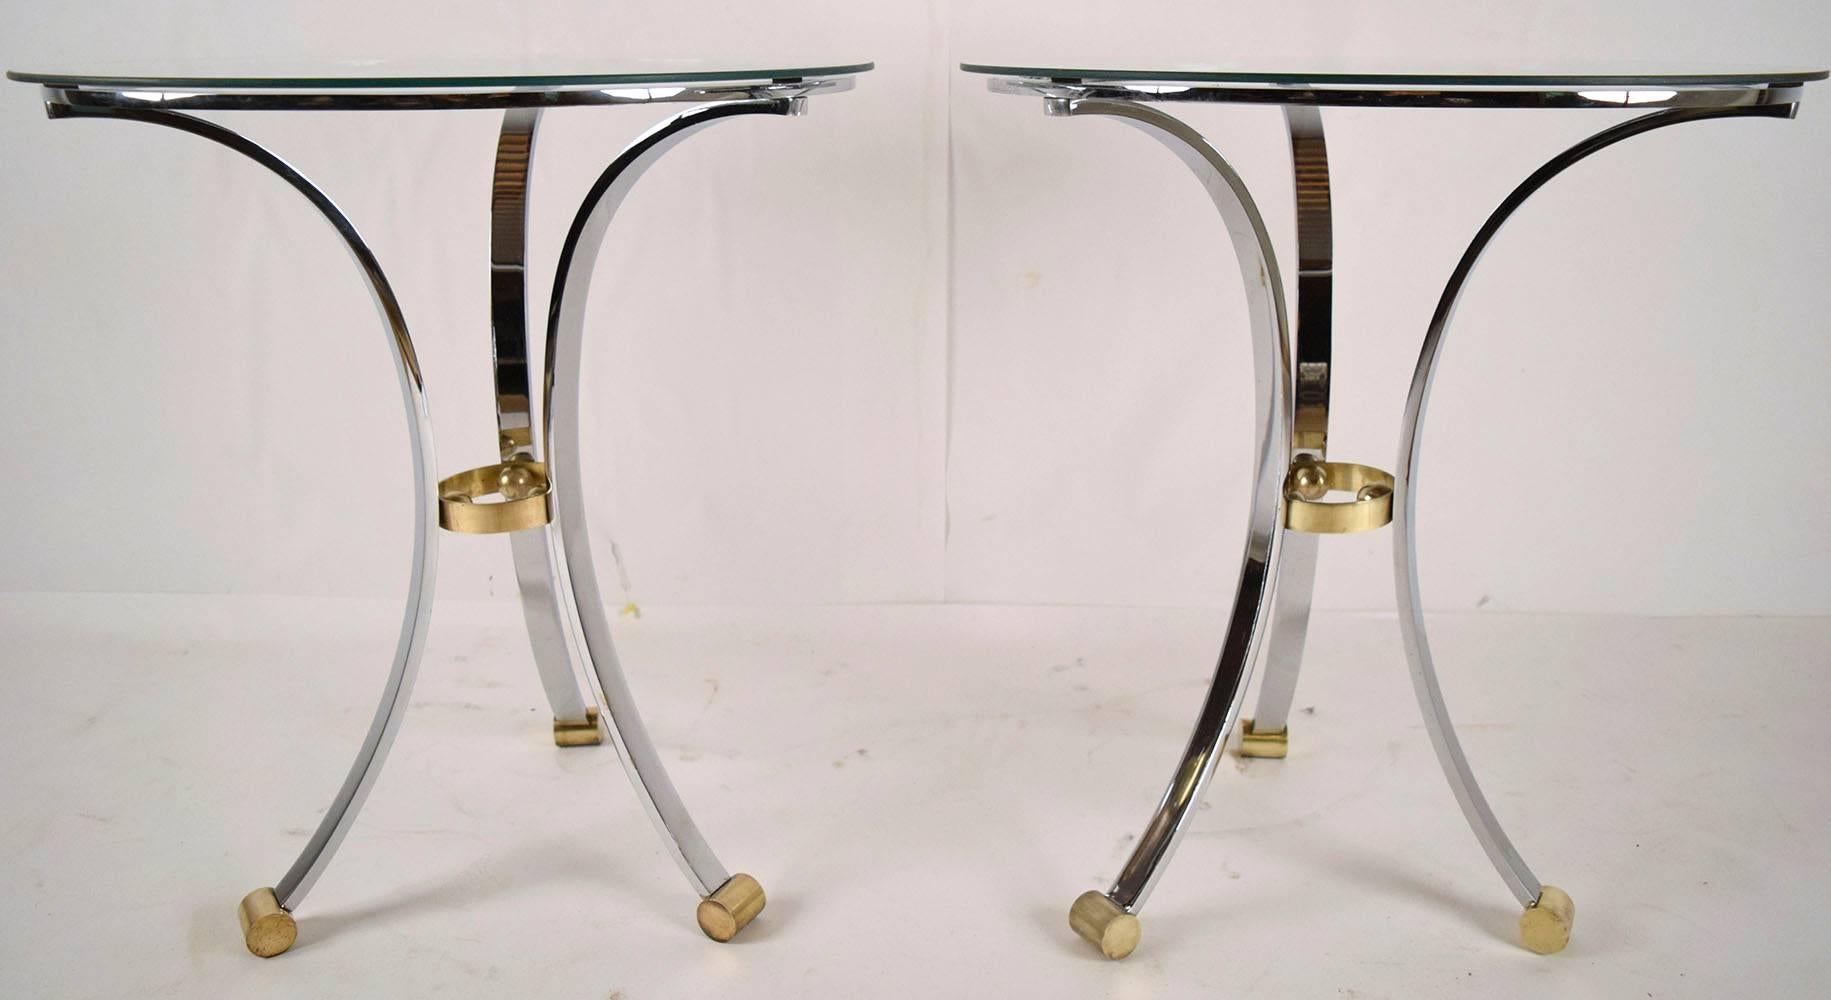 This pair of 1970's Mid-Century Modern Maison Jenson round End Tables features a solid chrome frame with a brass ring connecting the legs in the center and brass feet. The tables have round glass tops that rest upon the base. Both tables are in